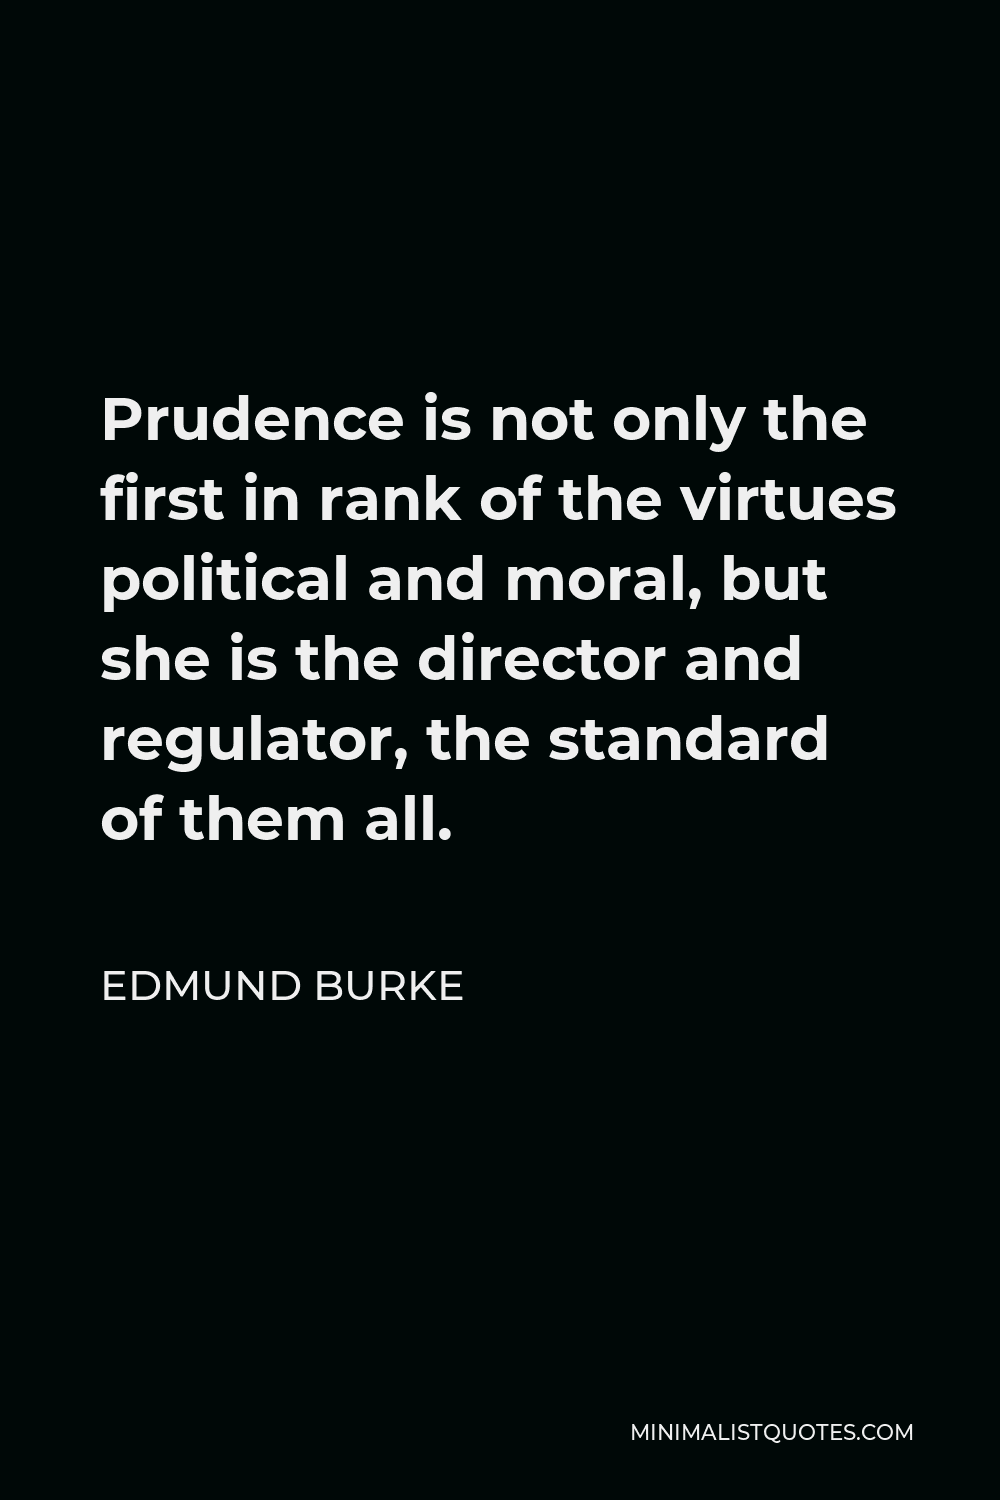 Edmund Burke Quote - Prudence is not only the first in rank of the virtues political and moral, but she is the director and regulator, the standard of them all.